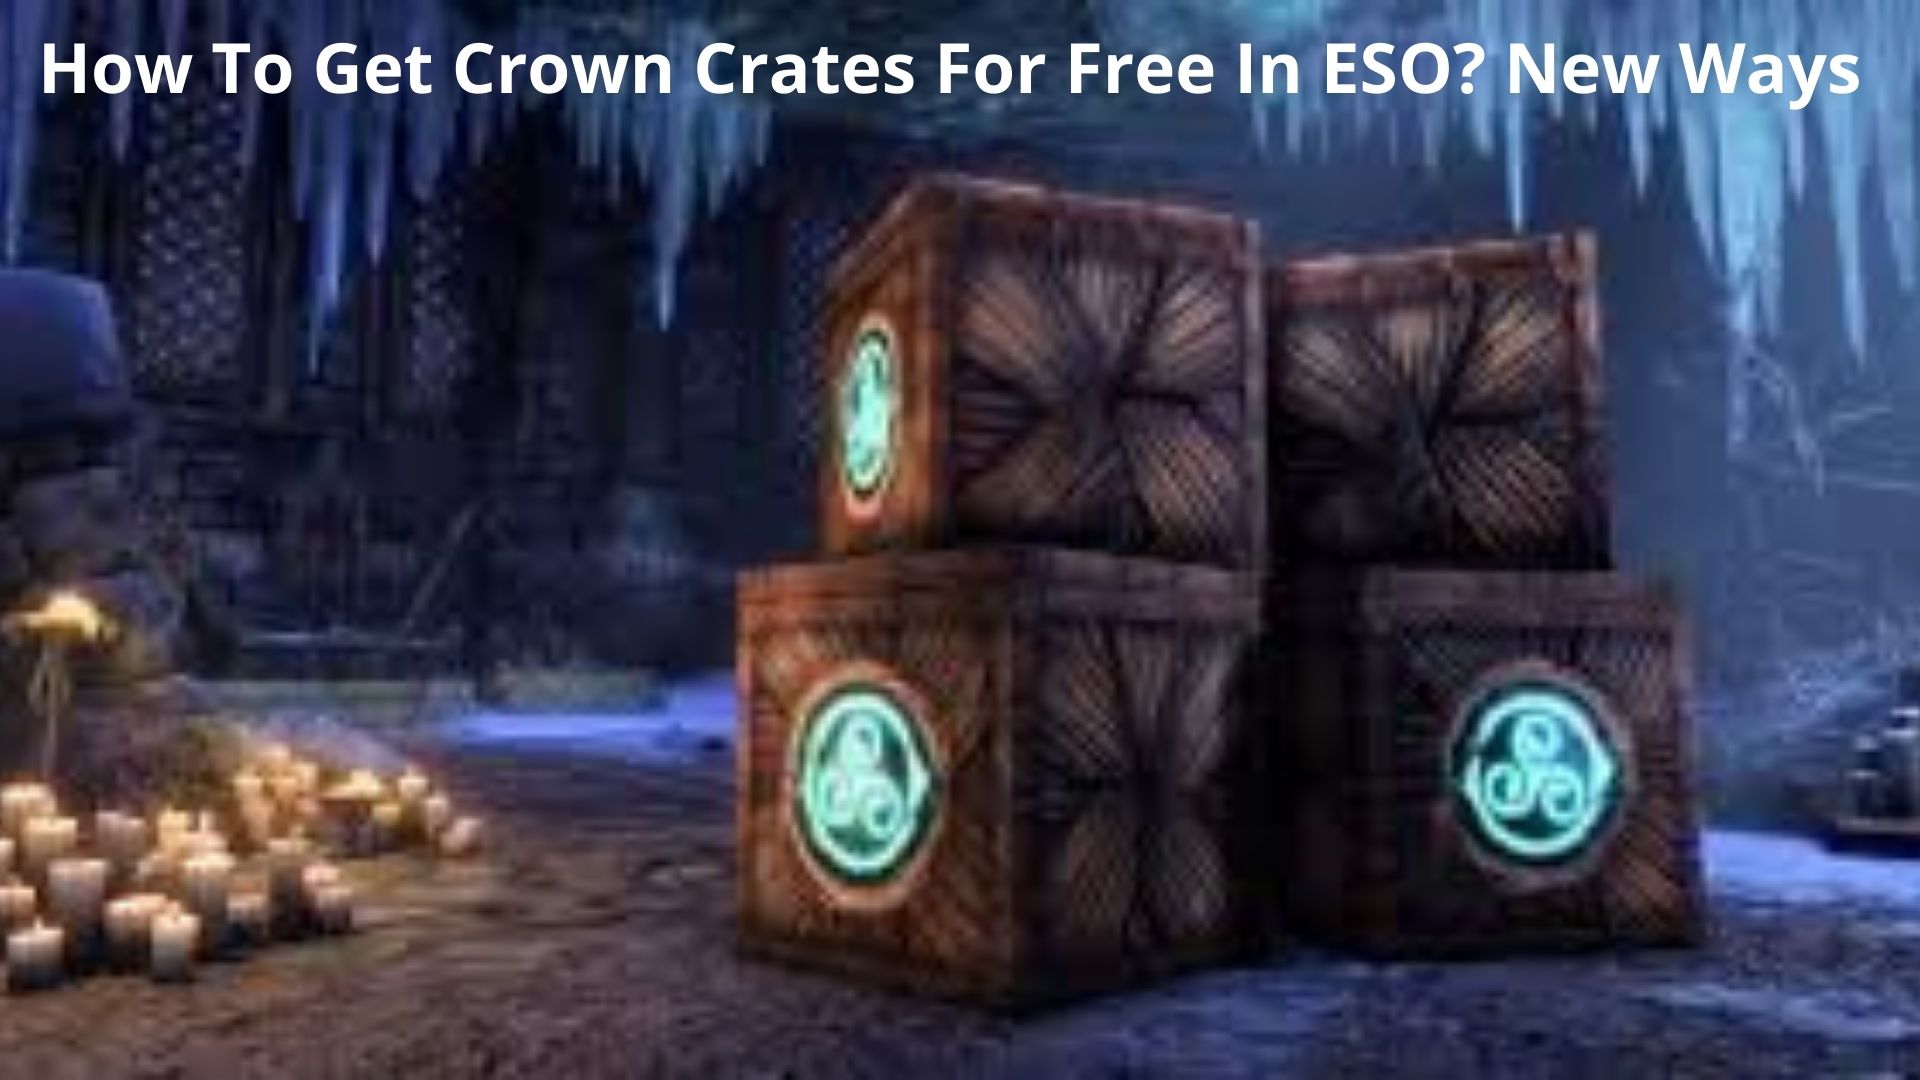 How To Get Crown Crates For Free In ESO